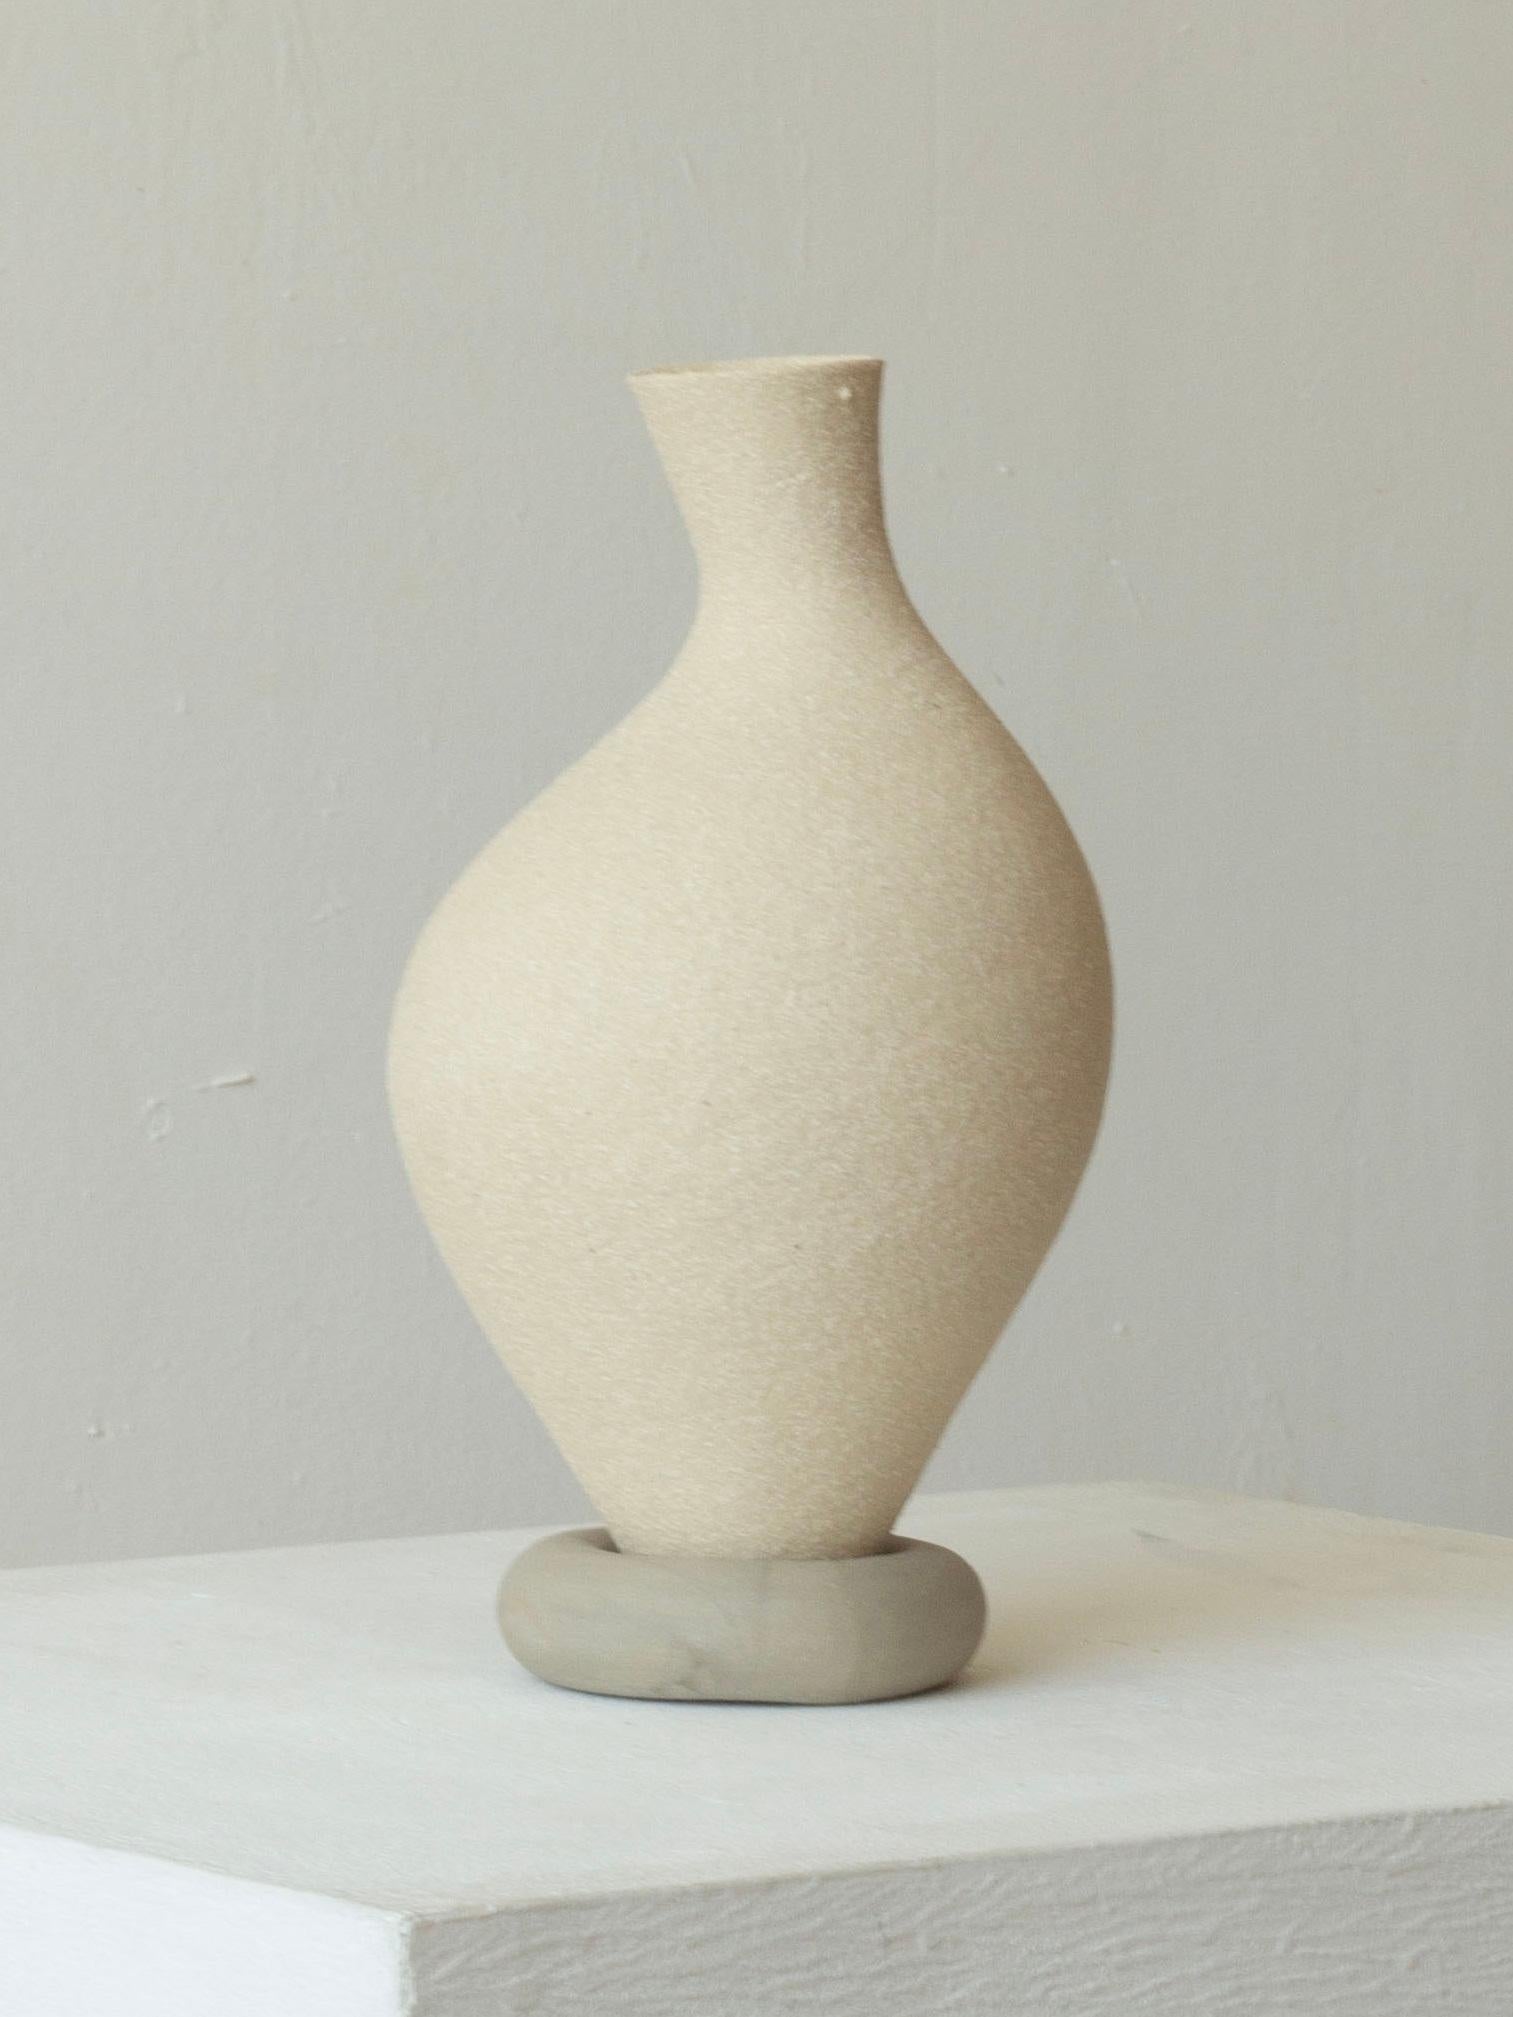 Woman 216 Vase by Karina Smagulova
One of a Kind.
Dimensions: Ø14 x H 24 cm.
Materials: White and grey stoneware.
​
With an Armenian and Kazakhstan heritage, Karina Smagulova was born in Greece in 1995 and graduated with a diploma in Architecture